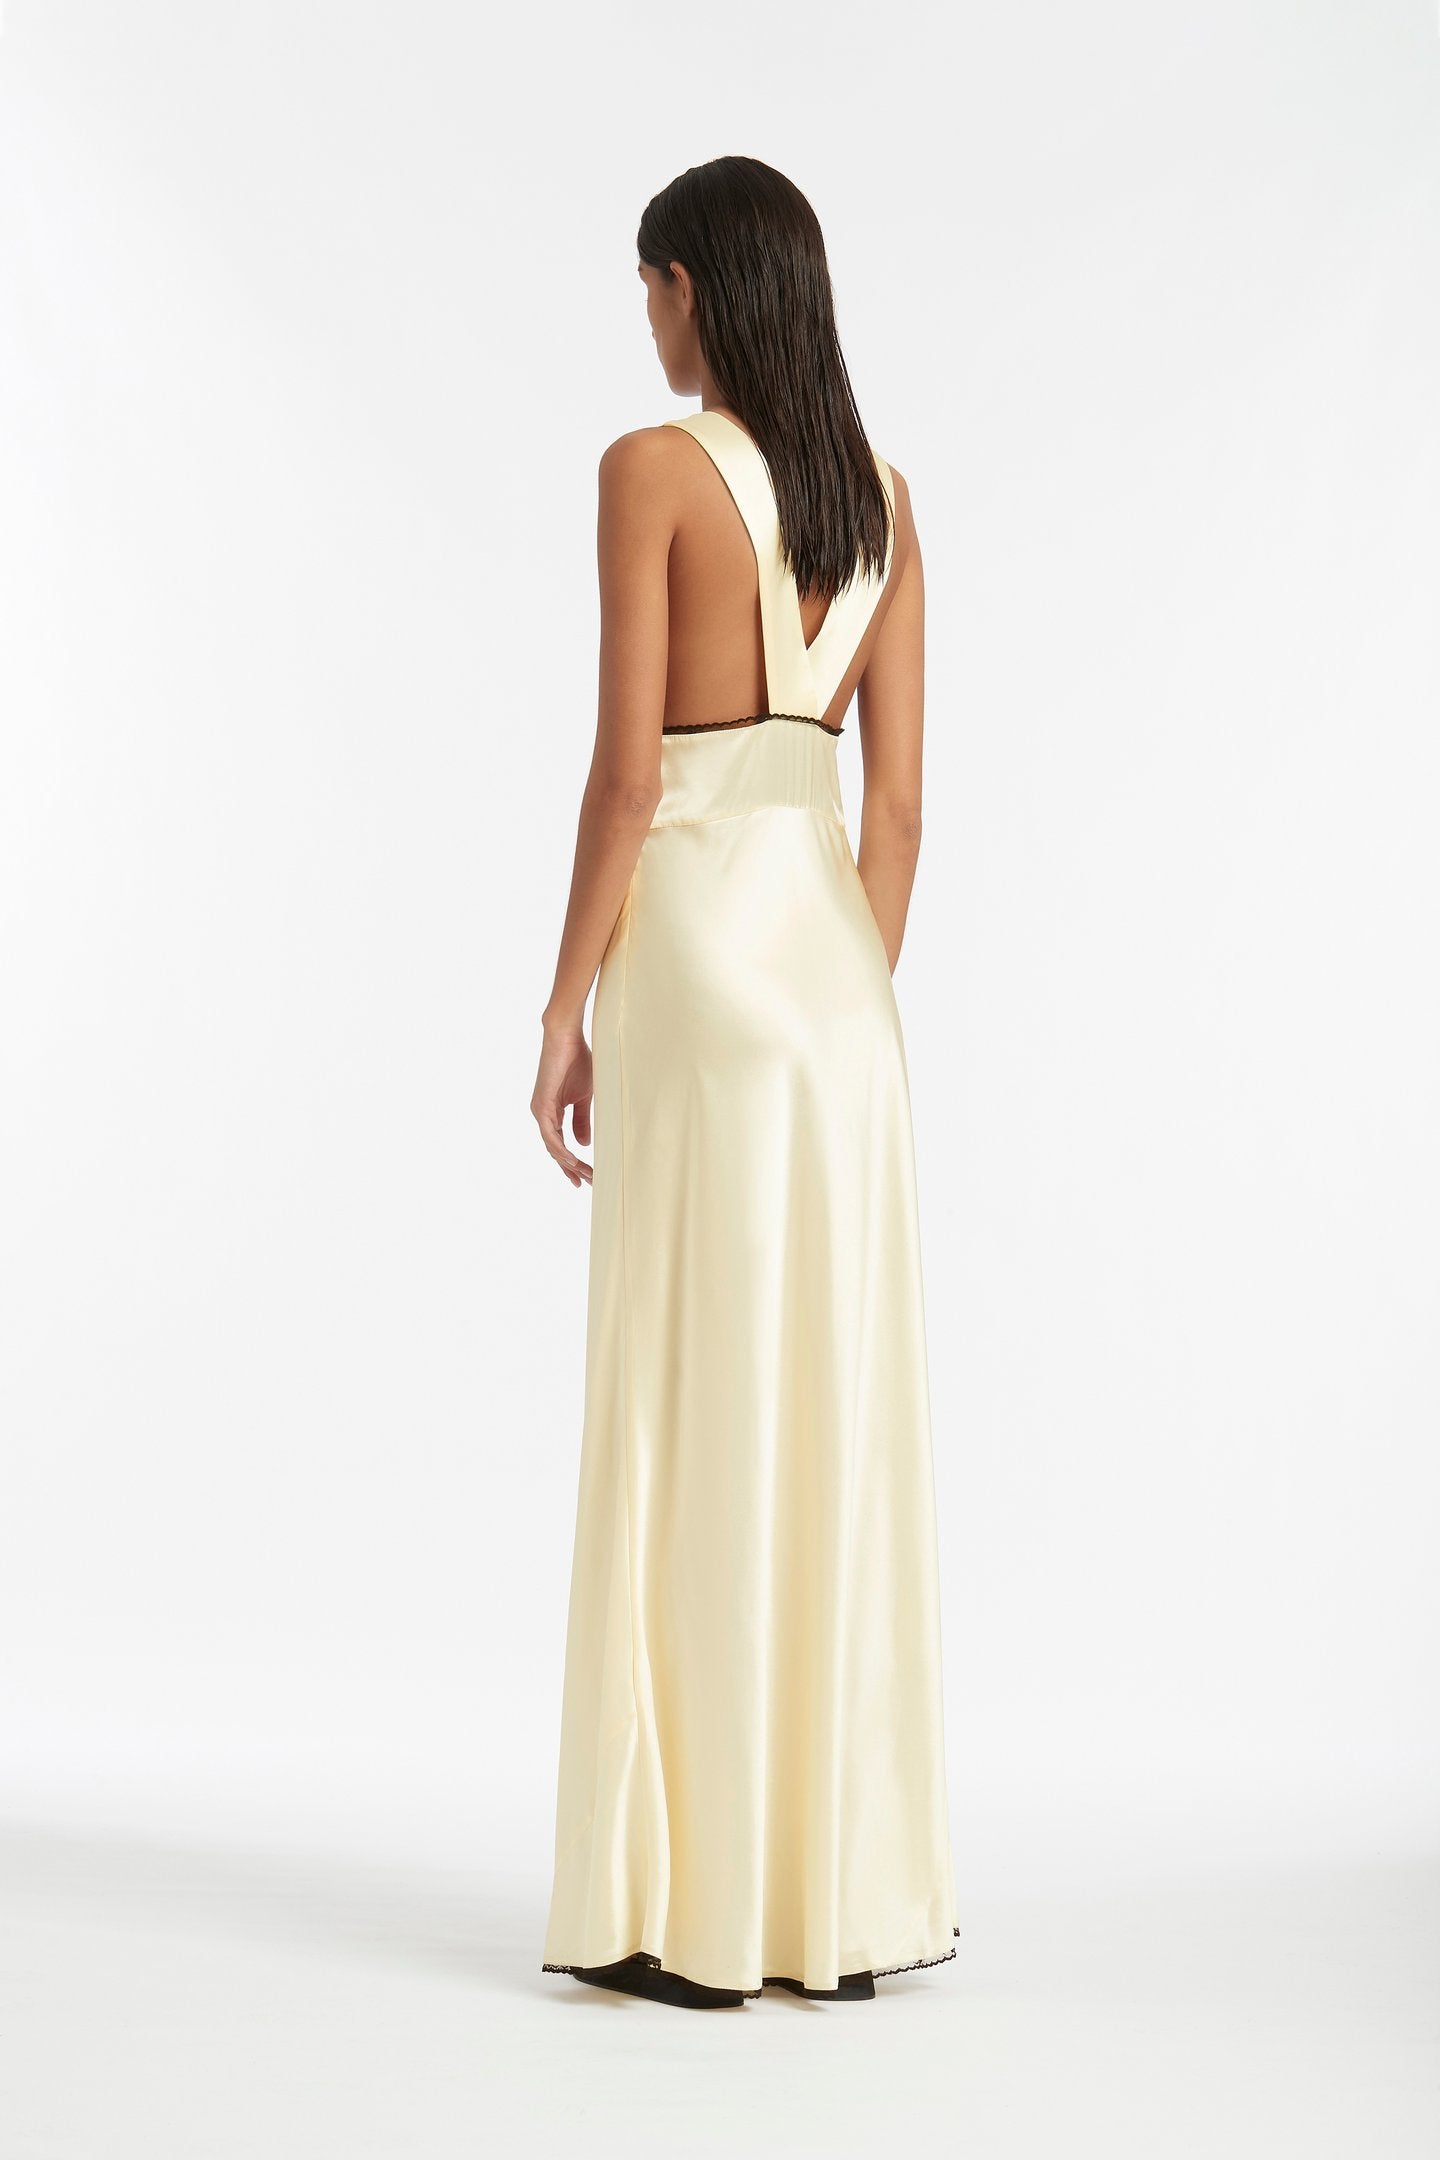 SIR - WILLA CUT OUT GOWN - WHITE Back angle